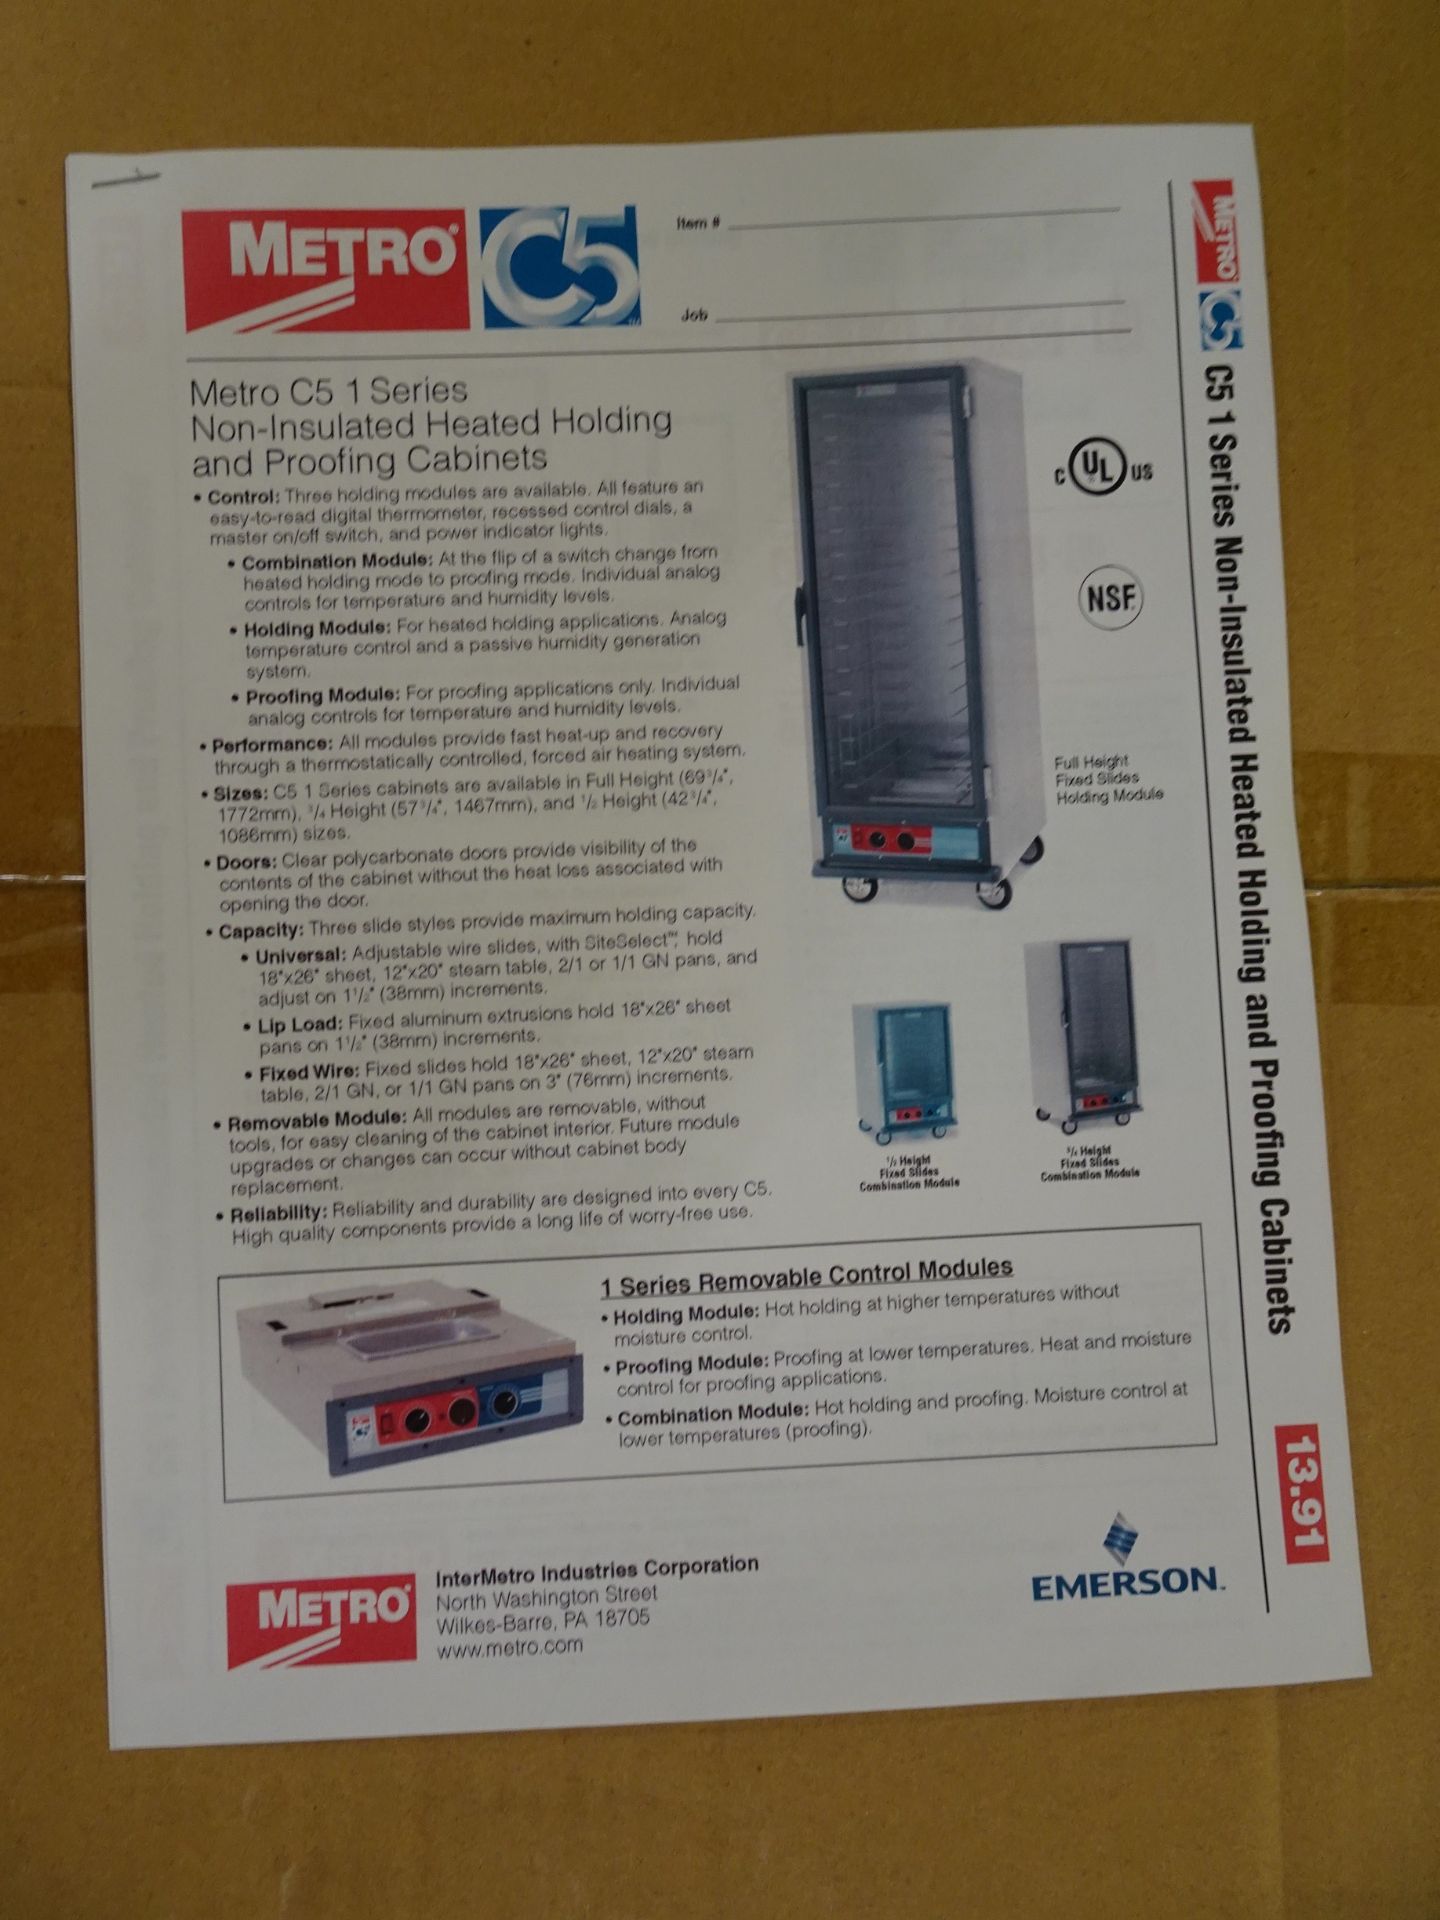 Mtero C5 series heated holding cabinet S/N: C5HME025719 - Image 6 of 9